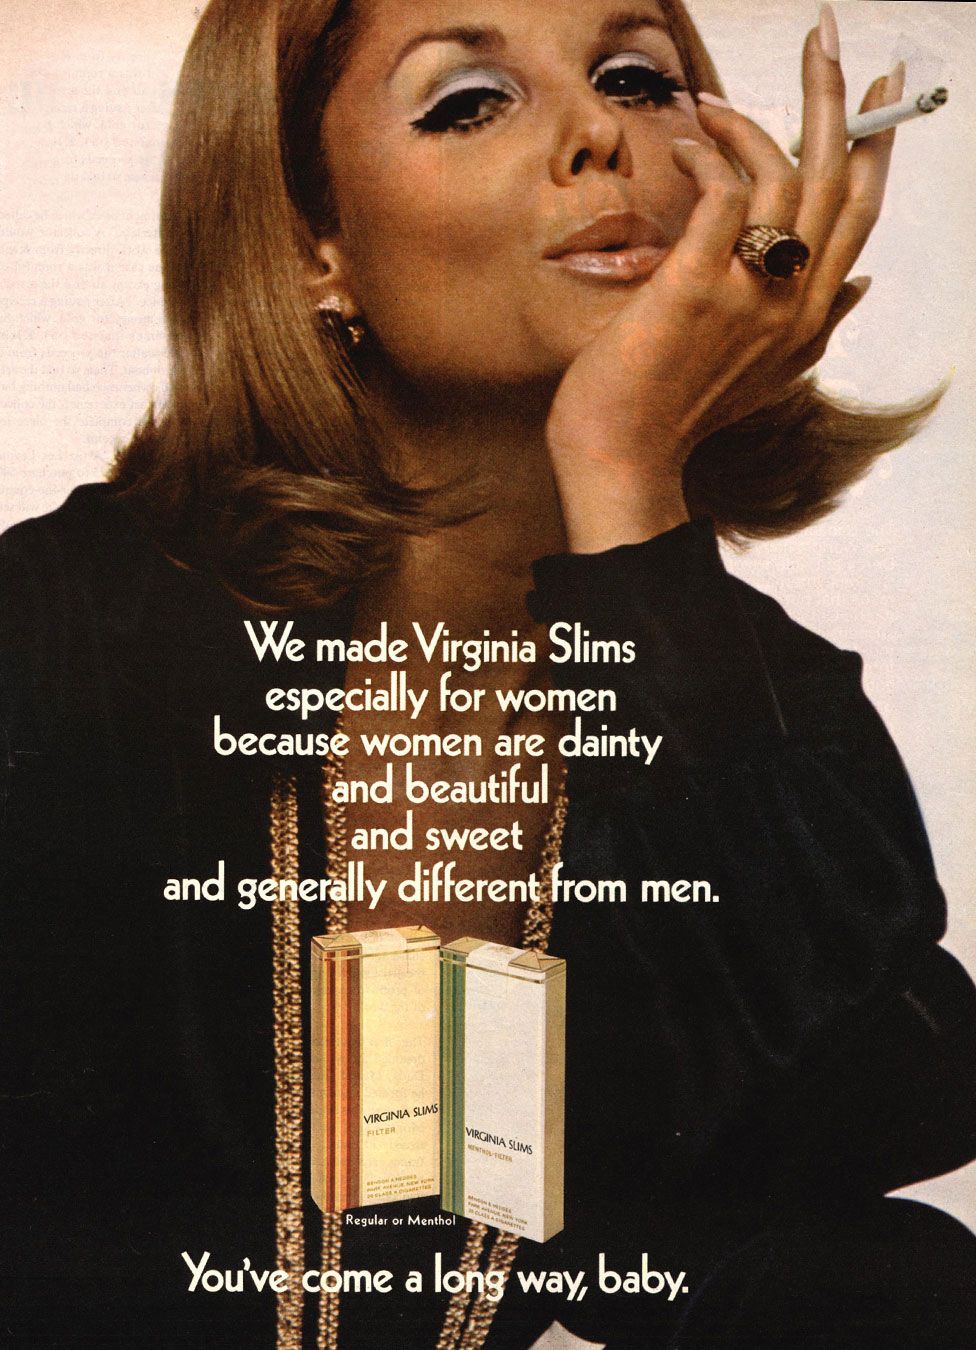 A Virginia Slims magazine advert from 1976